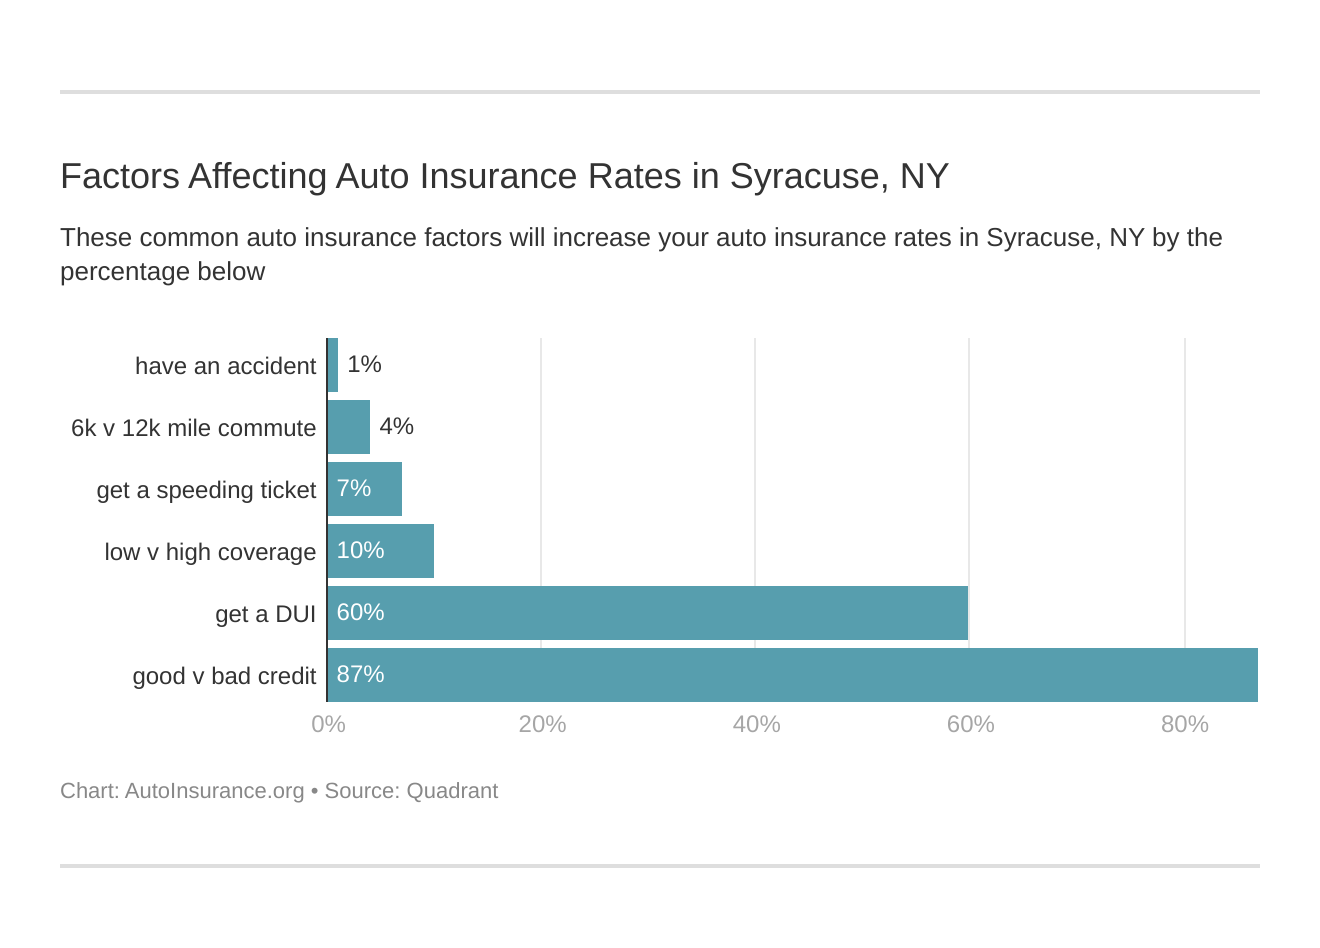 Factors Affecting Auto Insurance Rates in Syracuse, NY